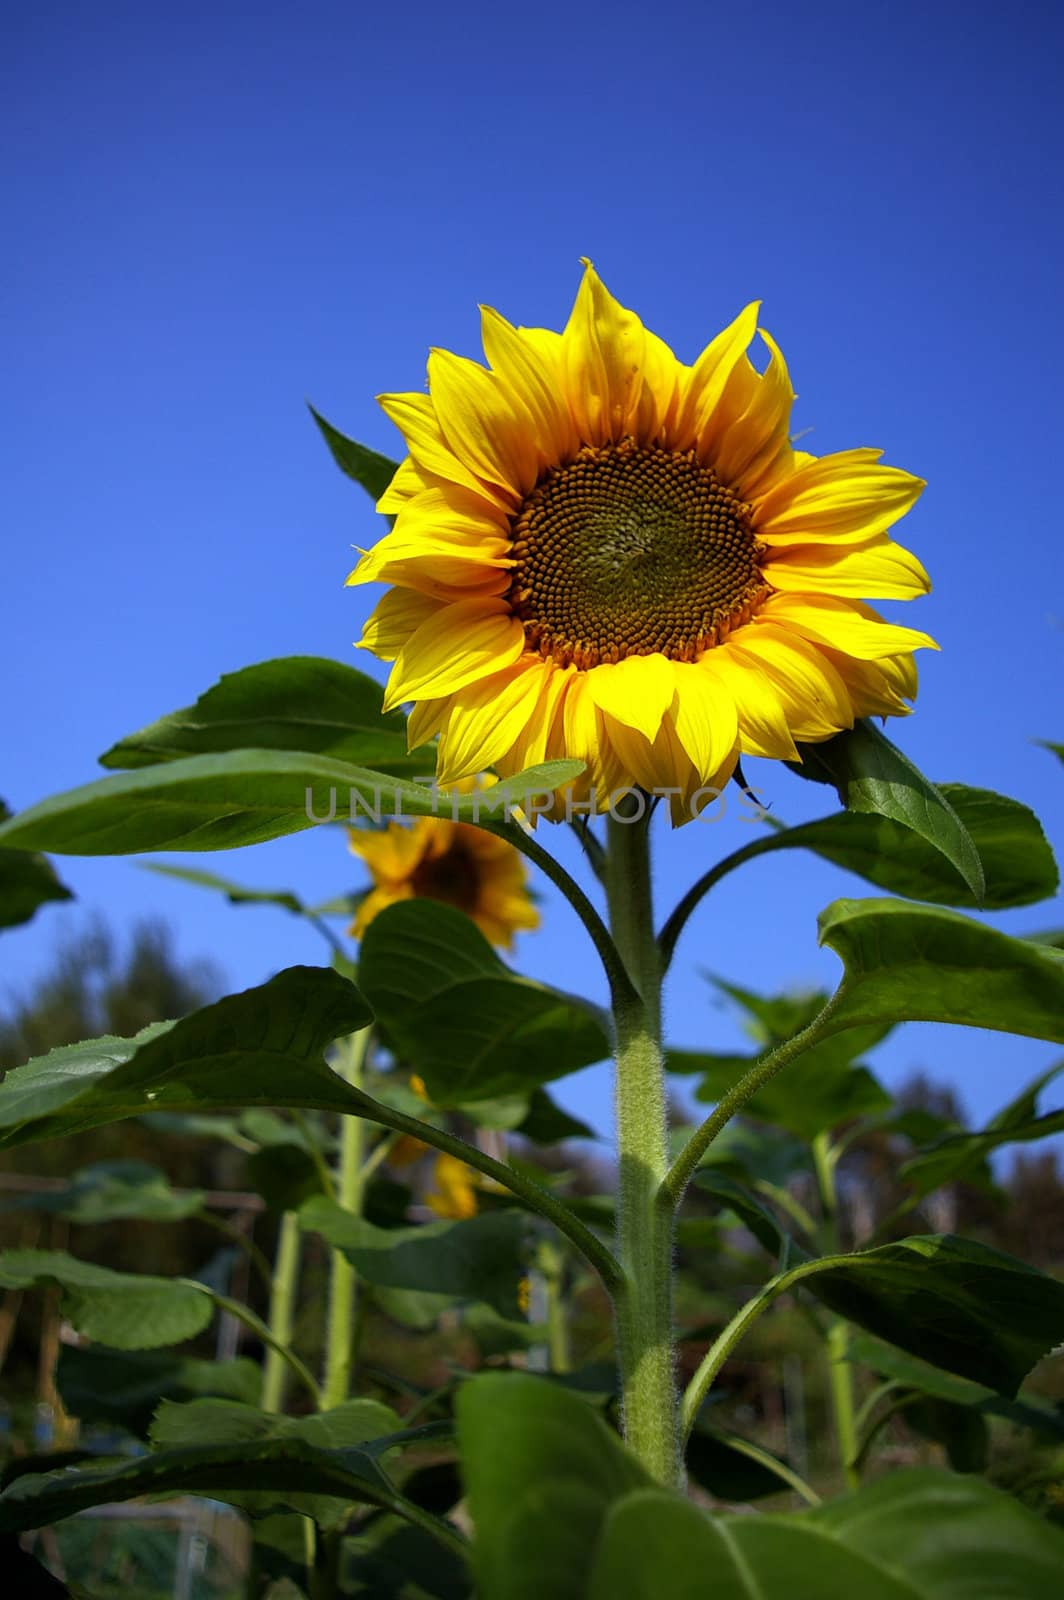 Sunflowers under blue sky by kawing921